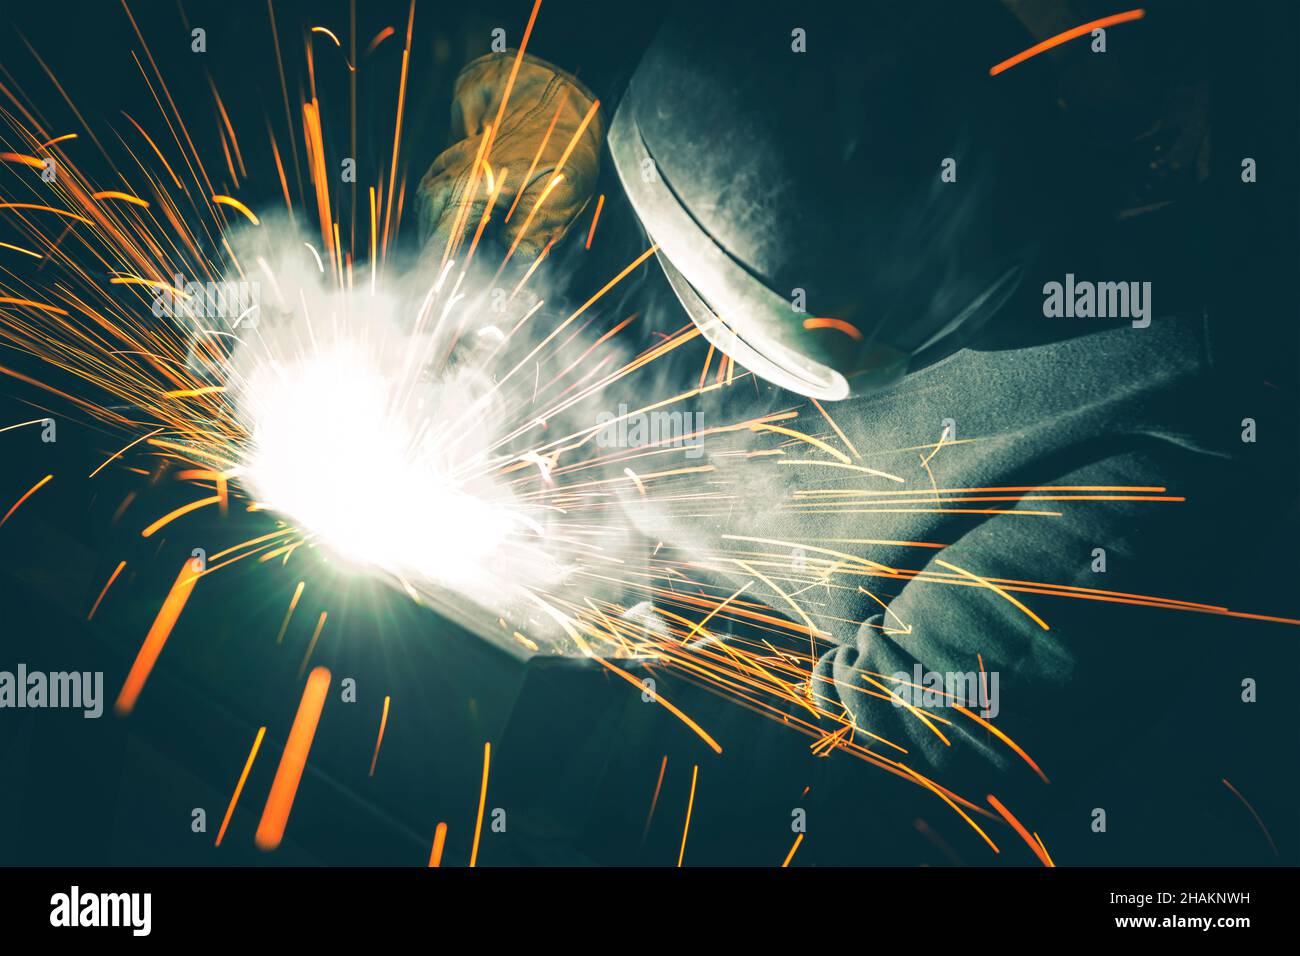 Professional Welder is Welding Two Metal Parts Together. Sparks Flying All Around. Metal Industry Theme. Stock Photo